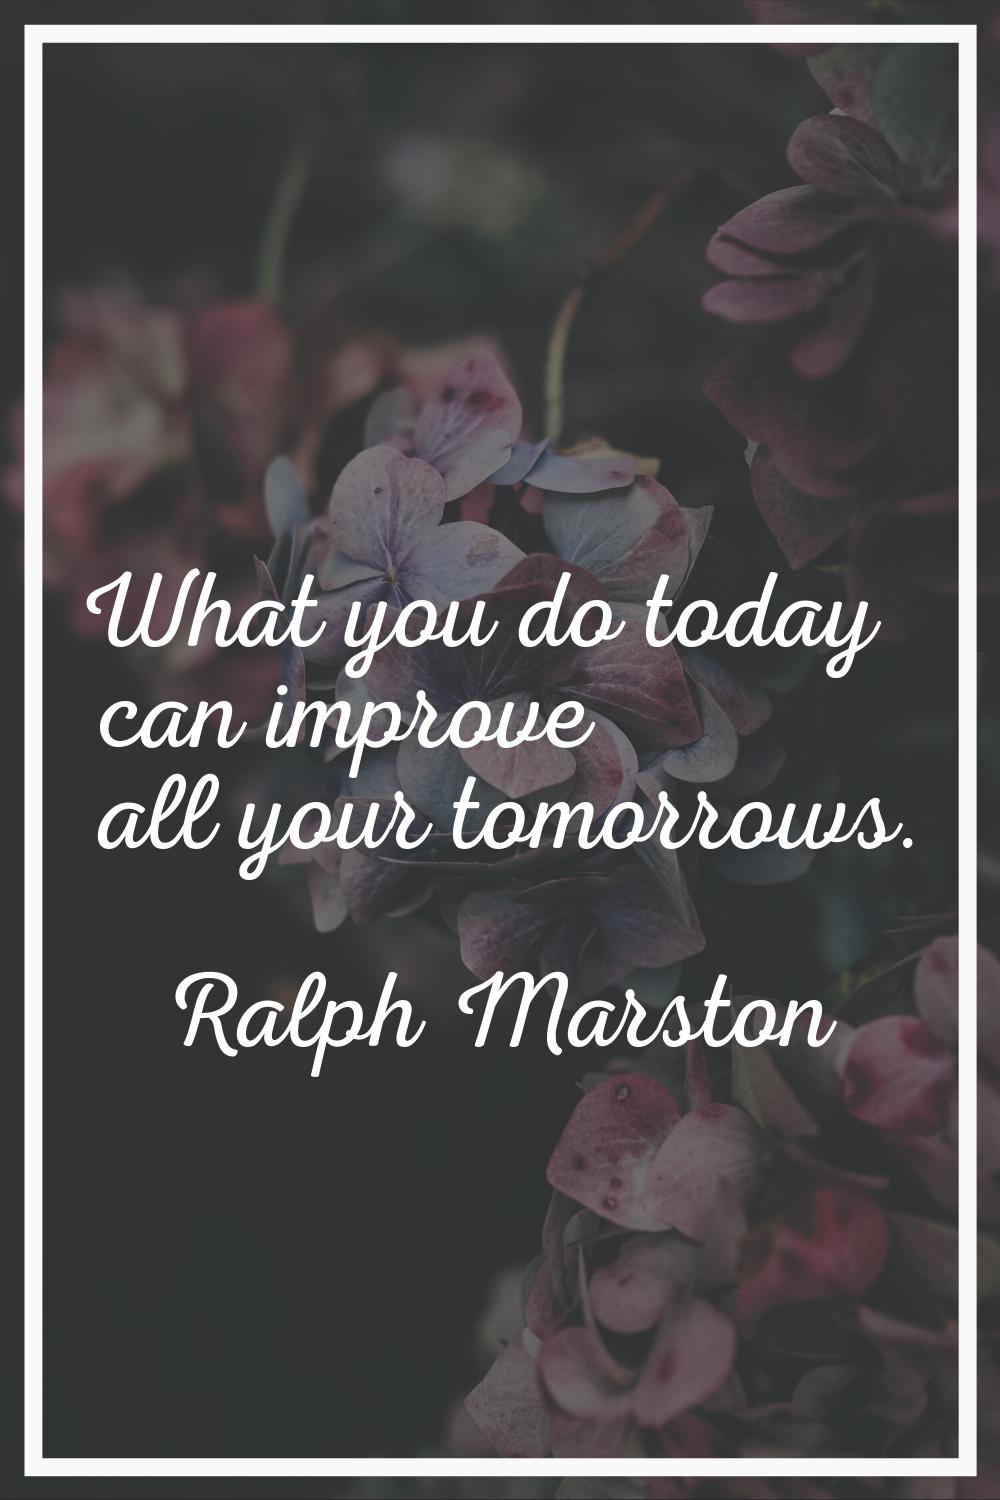 What You Do Today Can Improve All Your Tomorrows Who Is Author Download Image